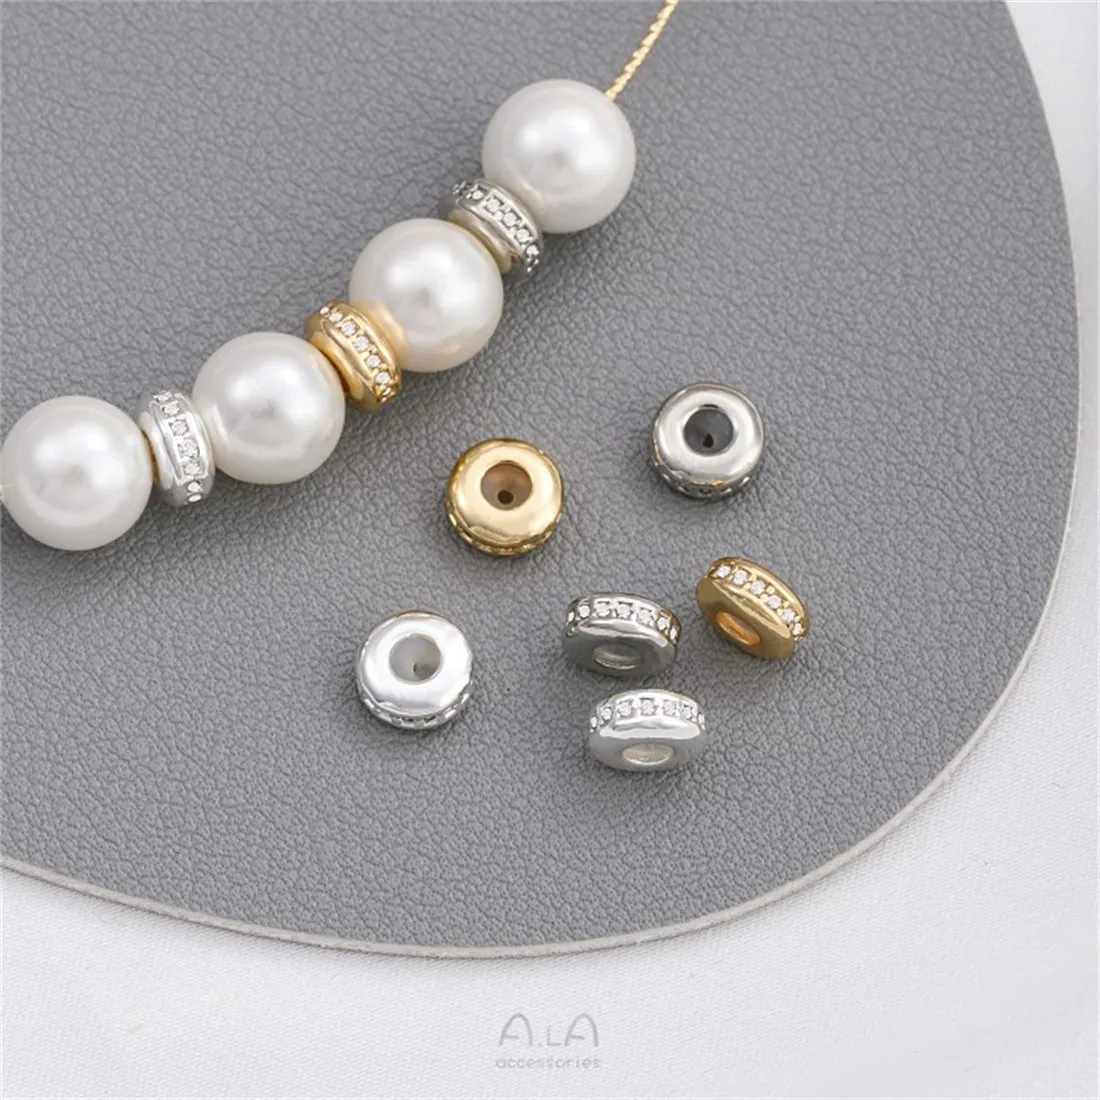 

14K Gold Coated Zirconium Stone Stopper Silicone Adjustment Bead Positioning Spacer Bead DIY Wheel Flat Bead Chain Accessory